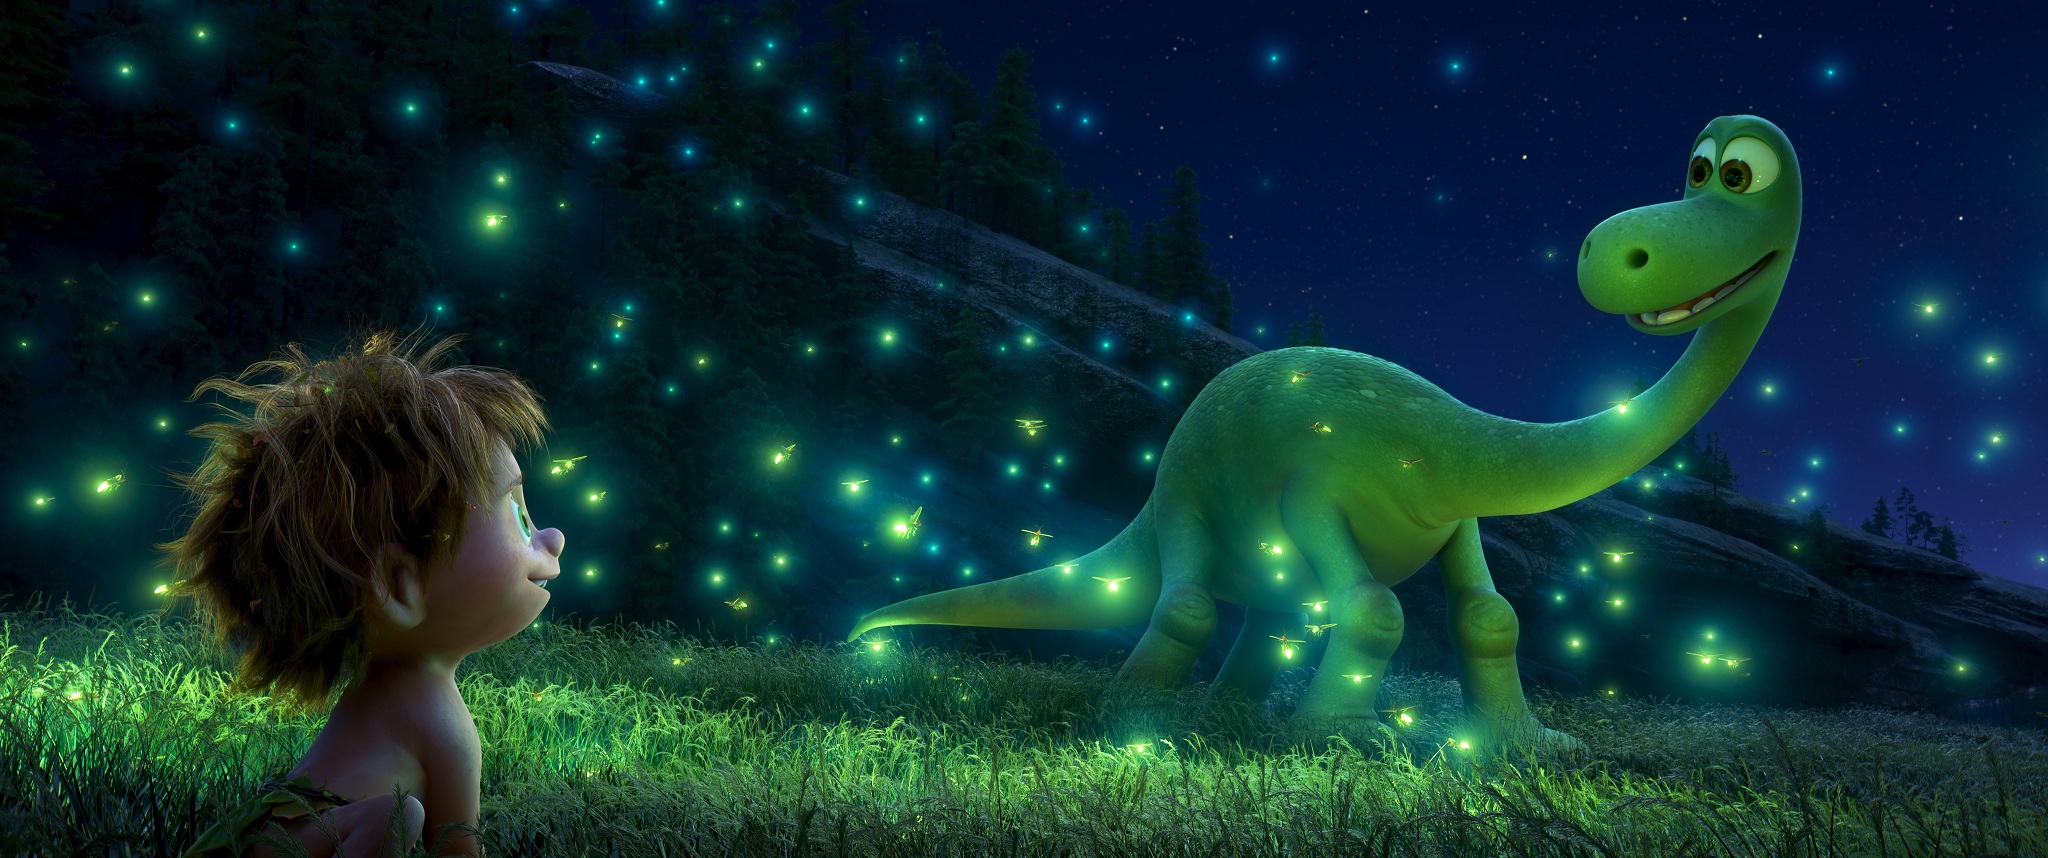 The Good Dinosaur Reacts to the Halloween Asteroid